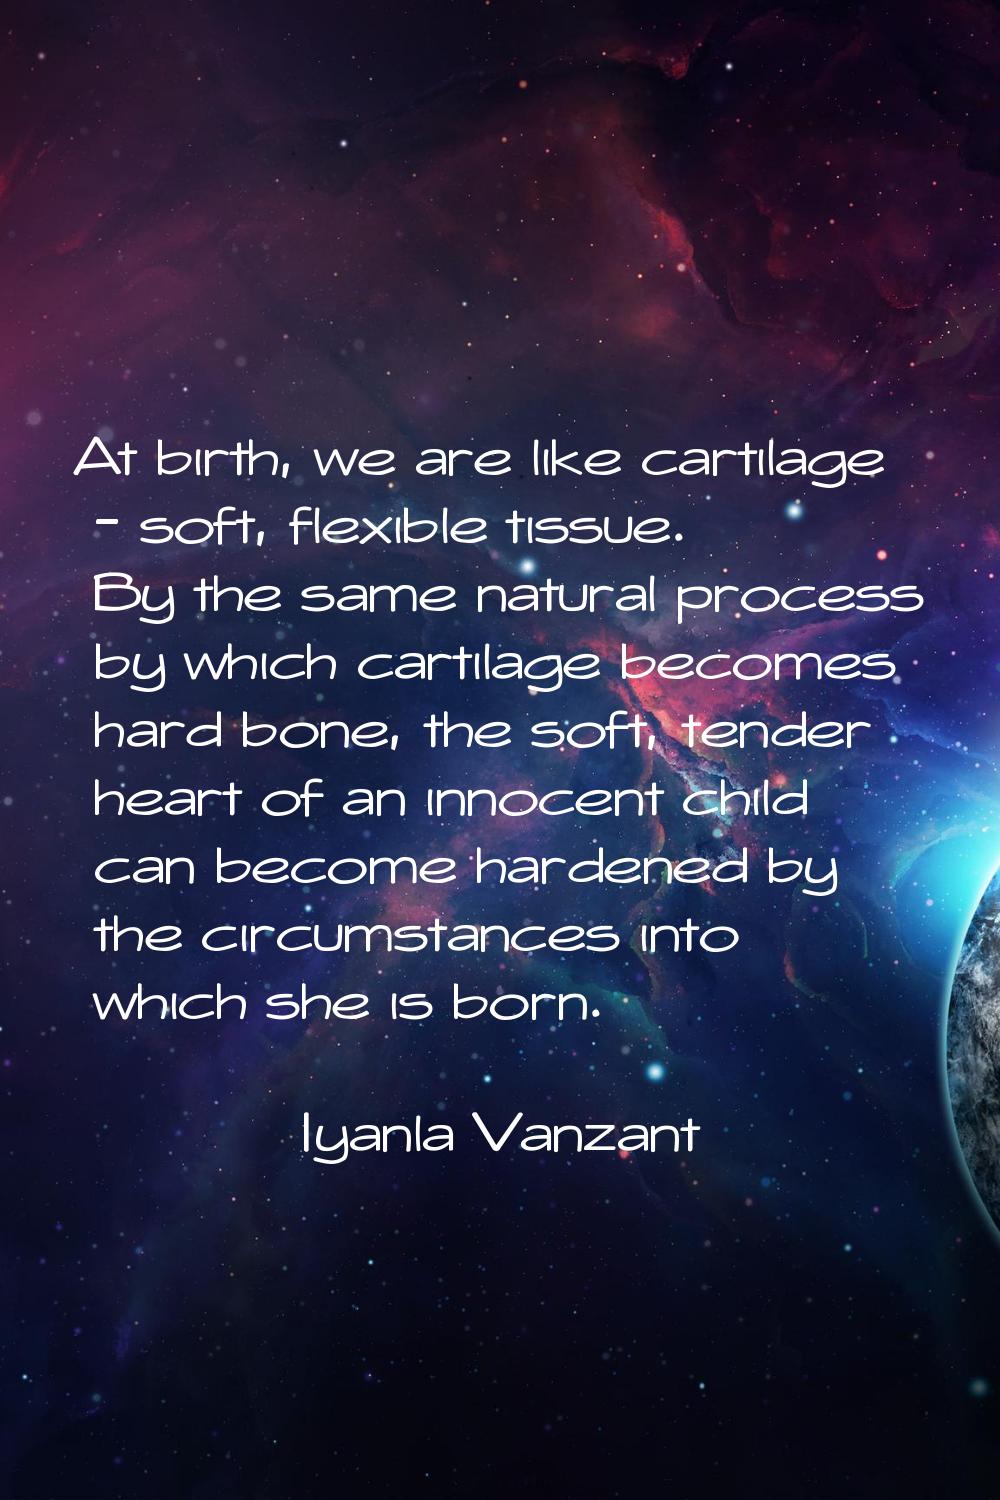 At birth, we are like cartilage - soft, flexible tissue. By the same natural process by which carti